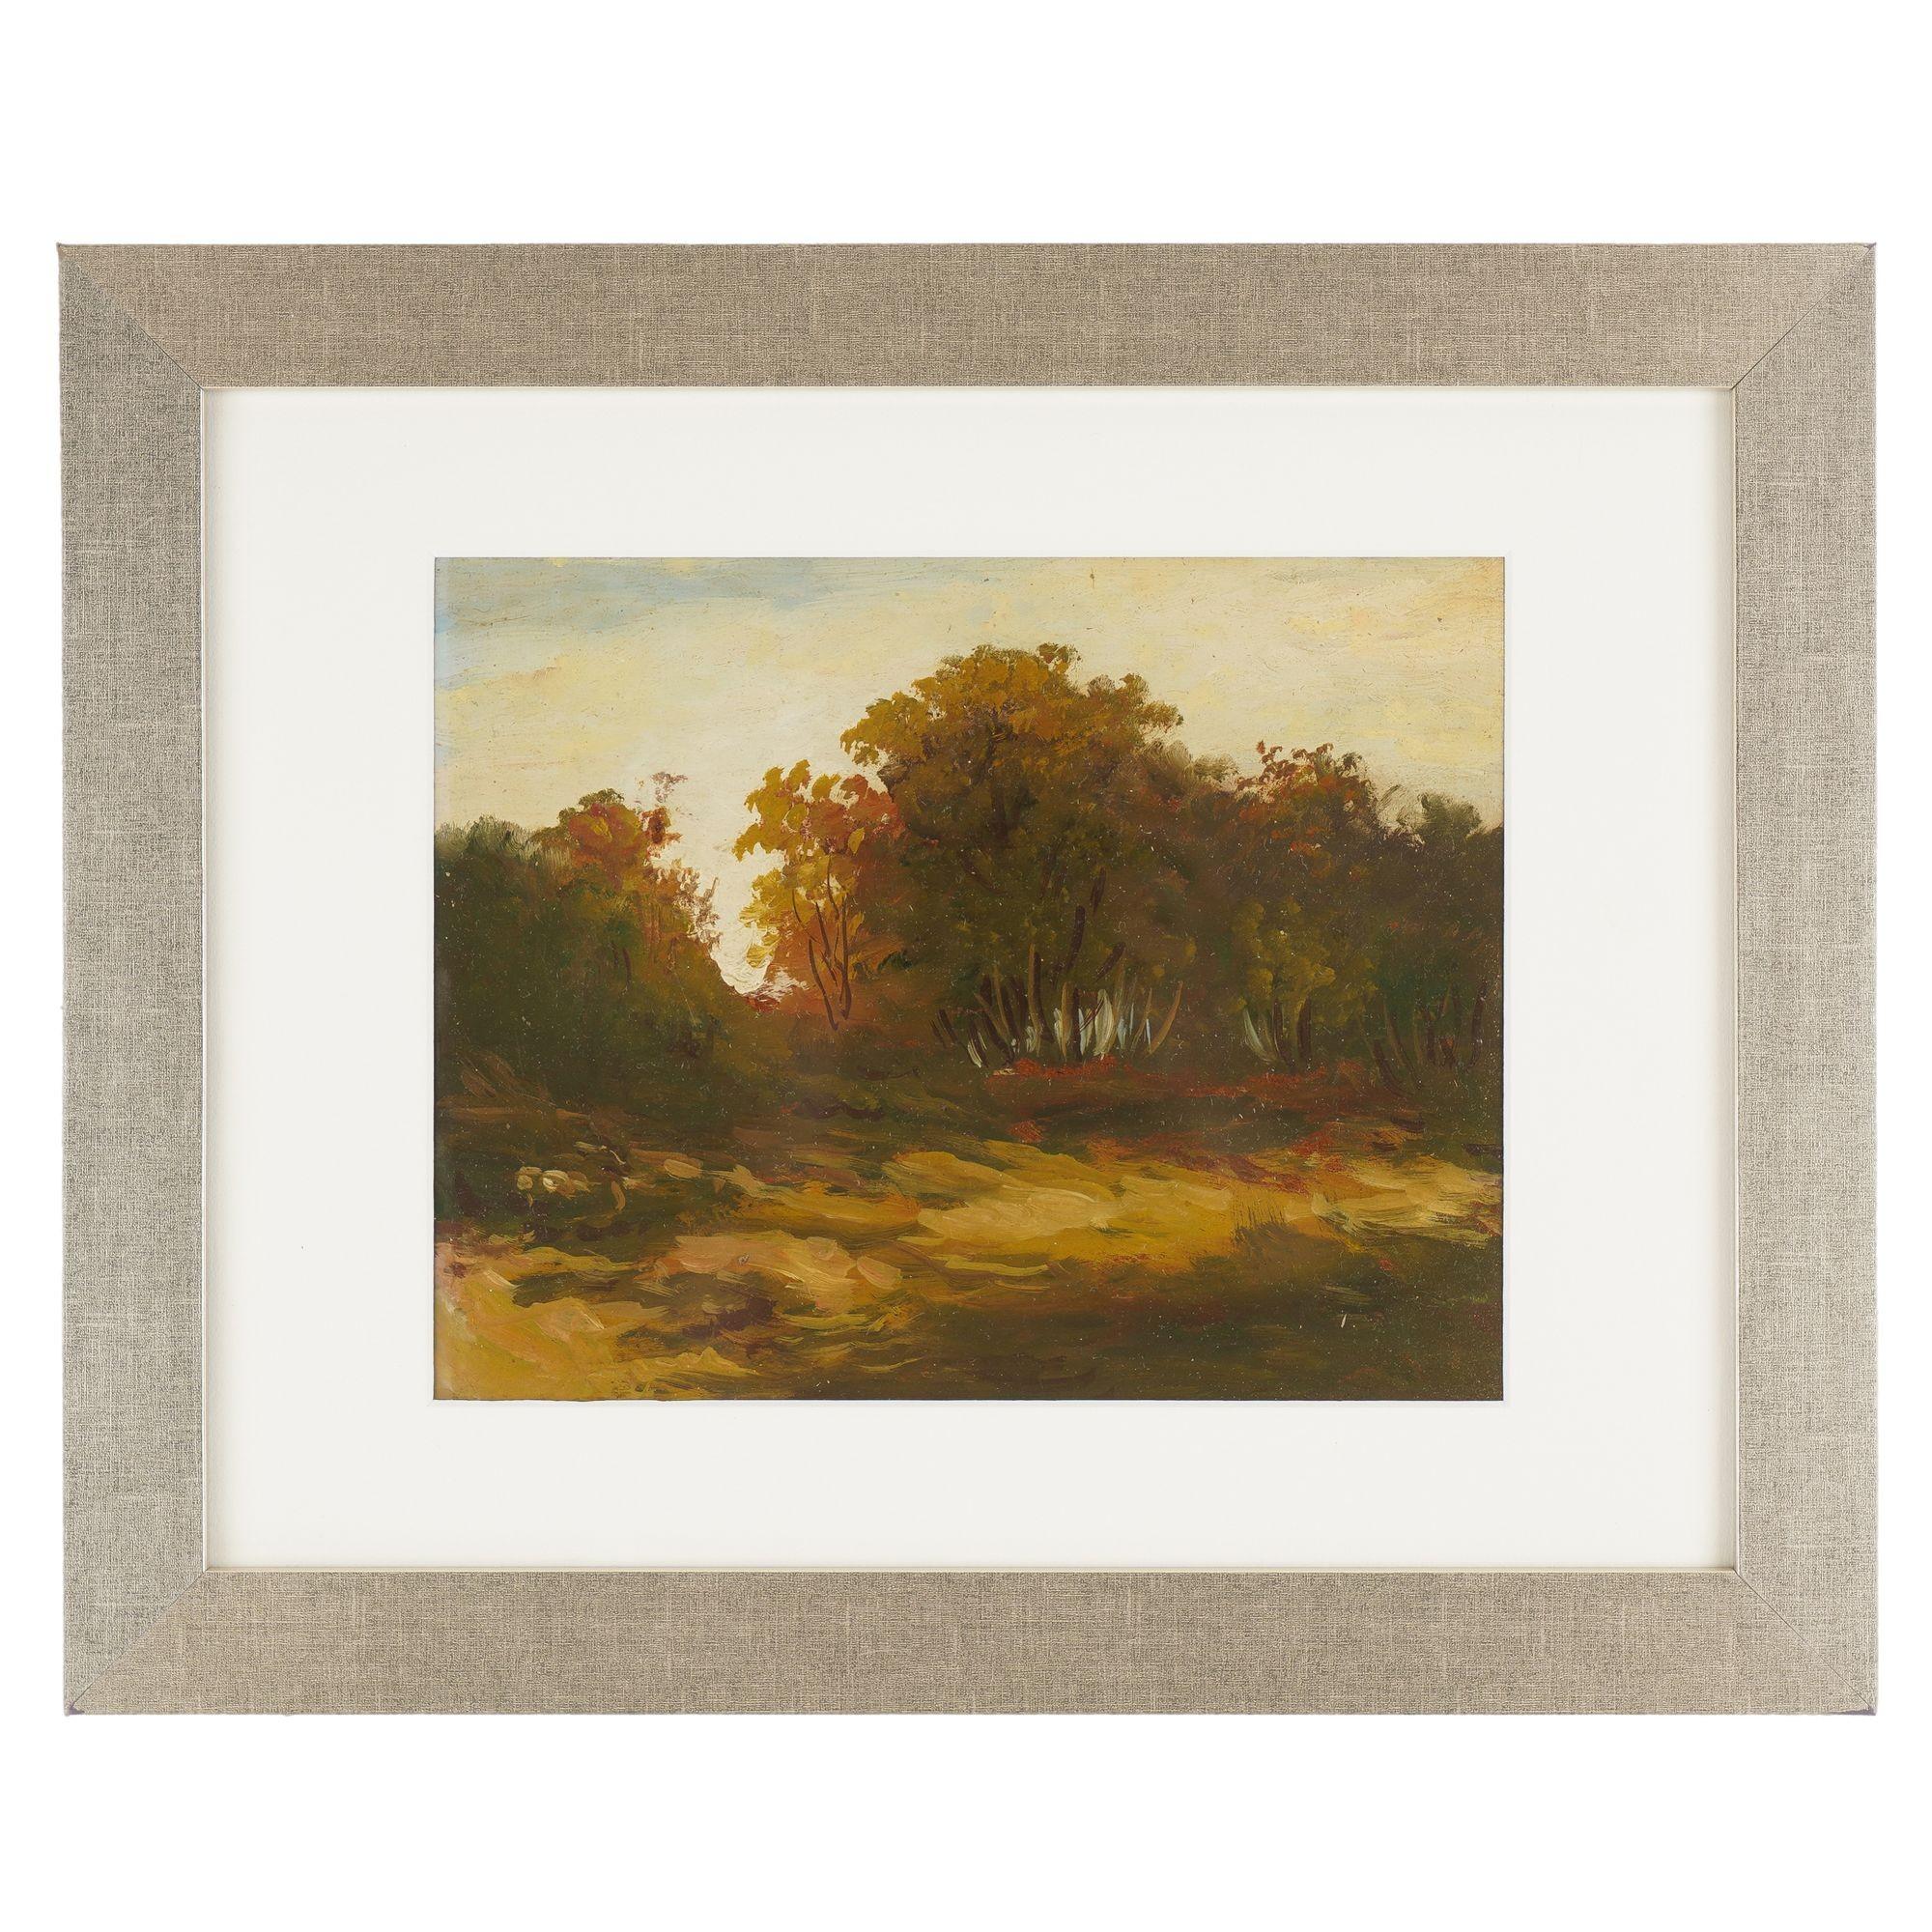 Anonymous set of three American oil on board landscape studies. The first painting features a stand of trees across a meadow at golden hour, with the sun low in the sky in the background and casting warm orange light up into the treetops. The second